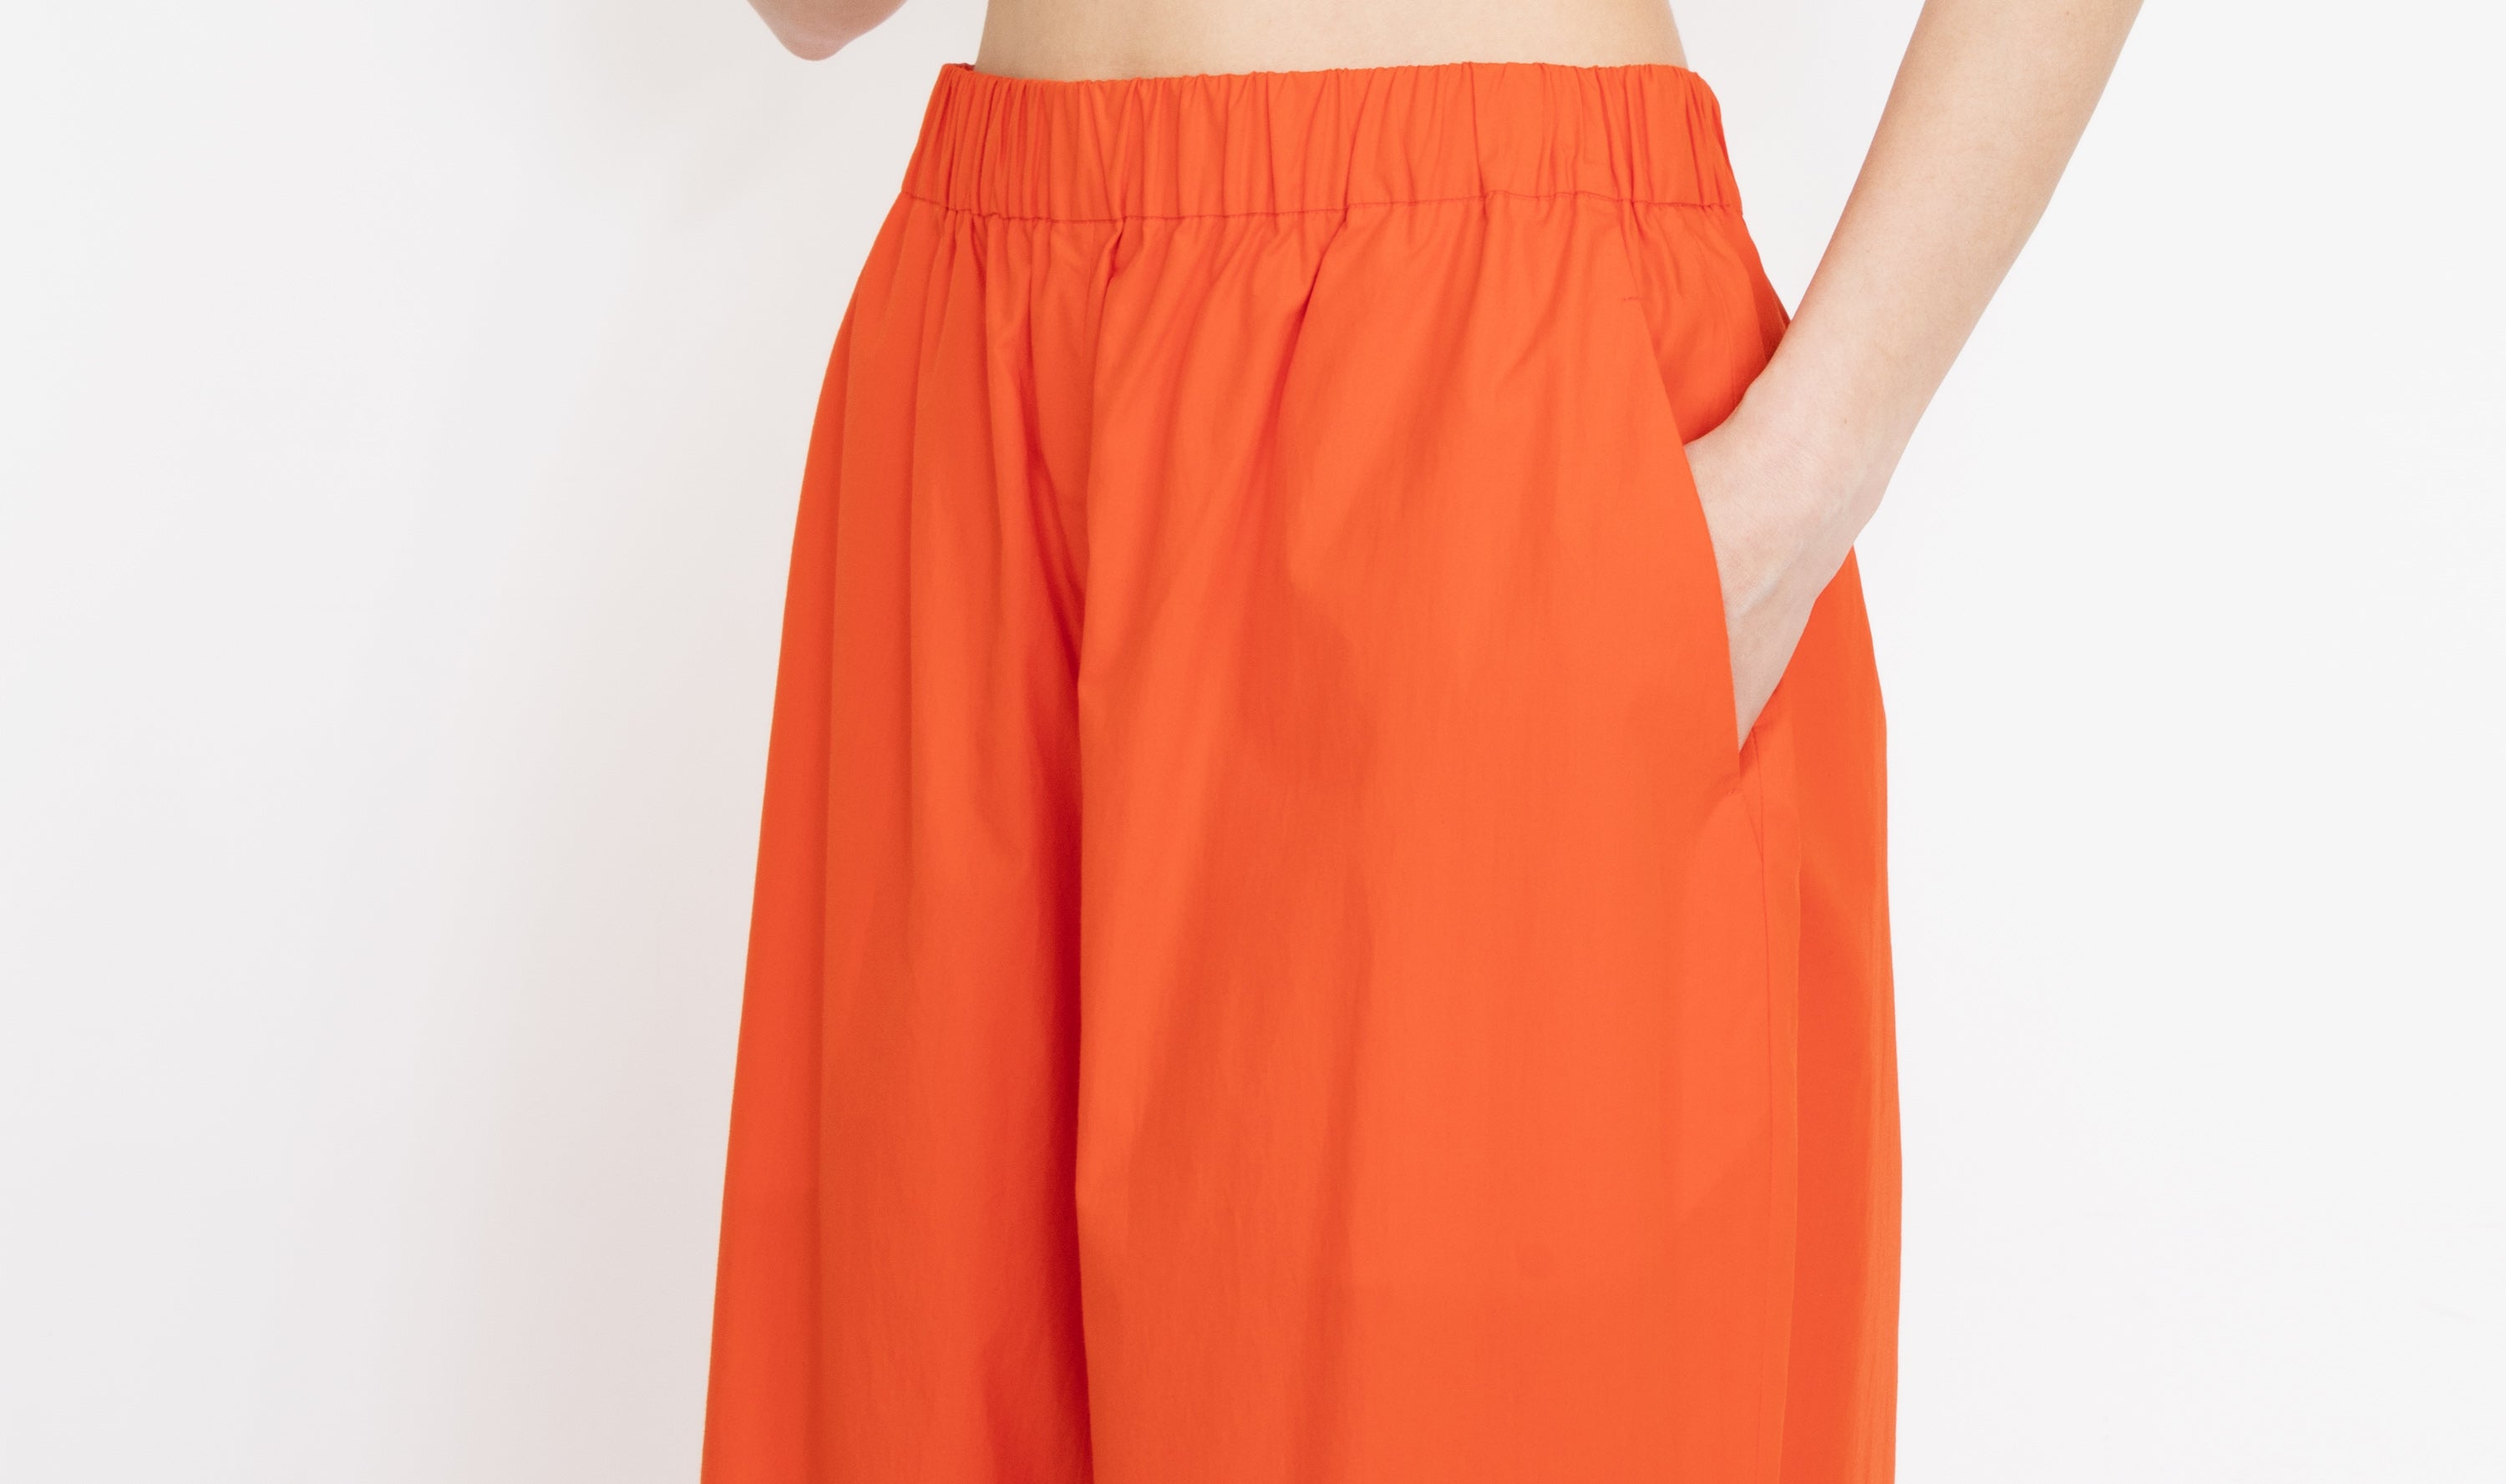 red orange cotton trousers